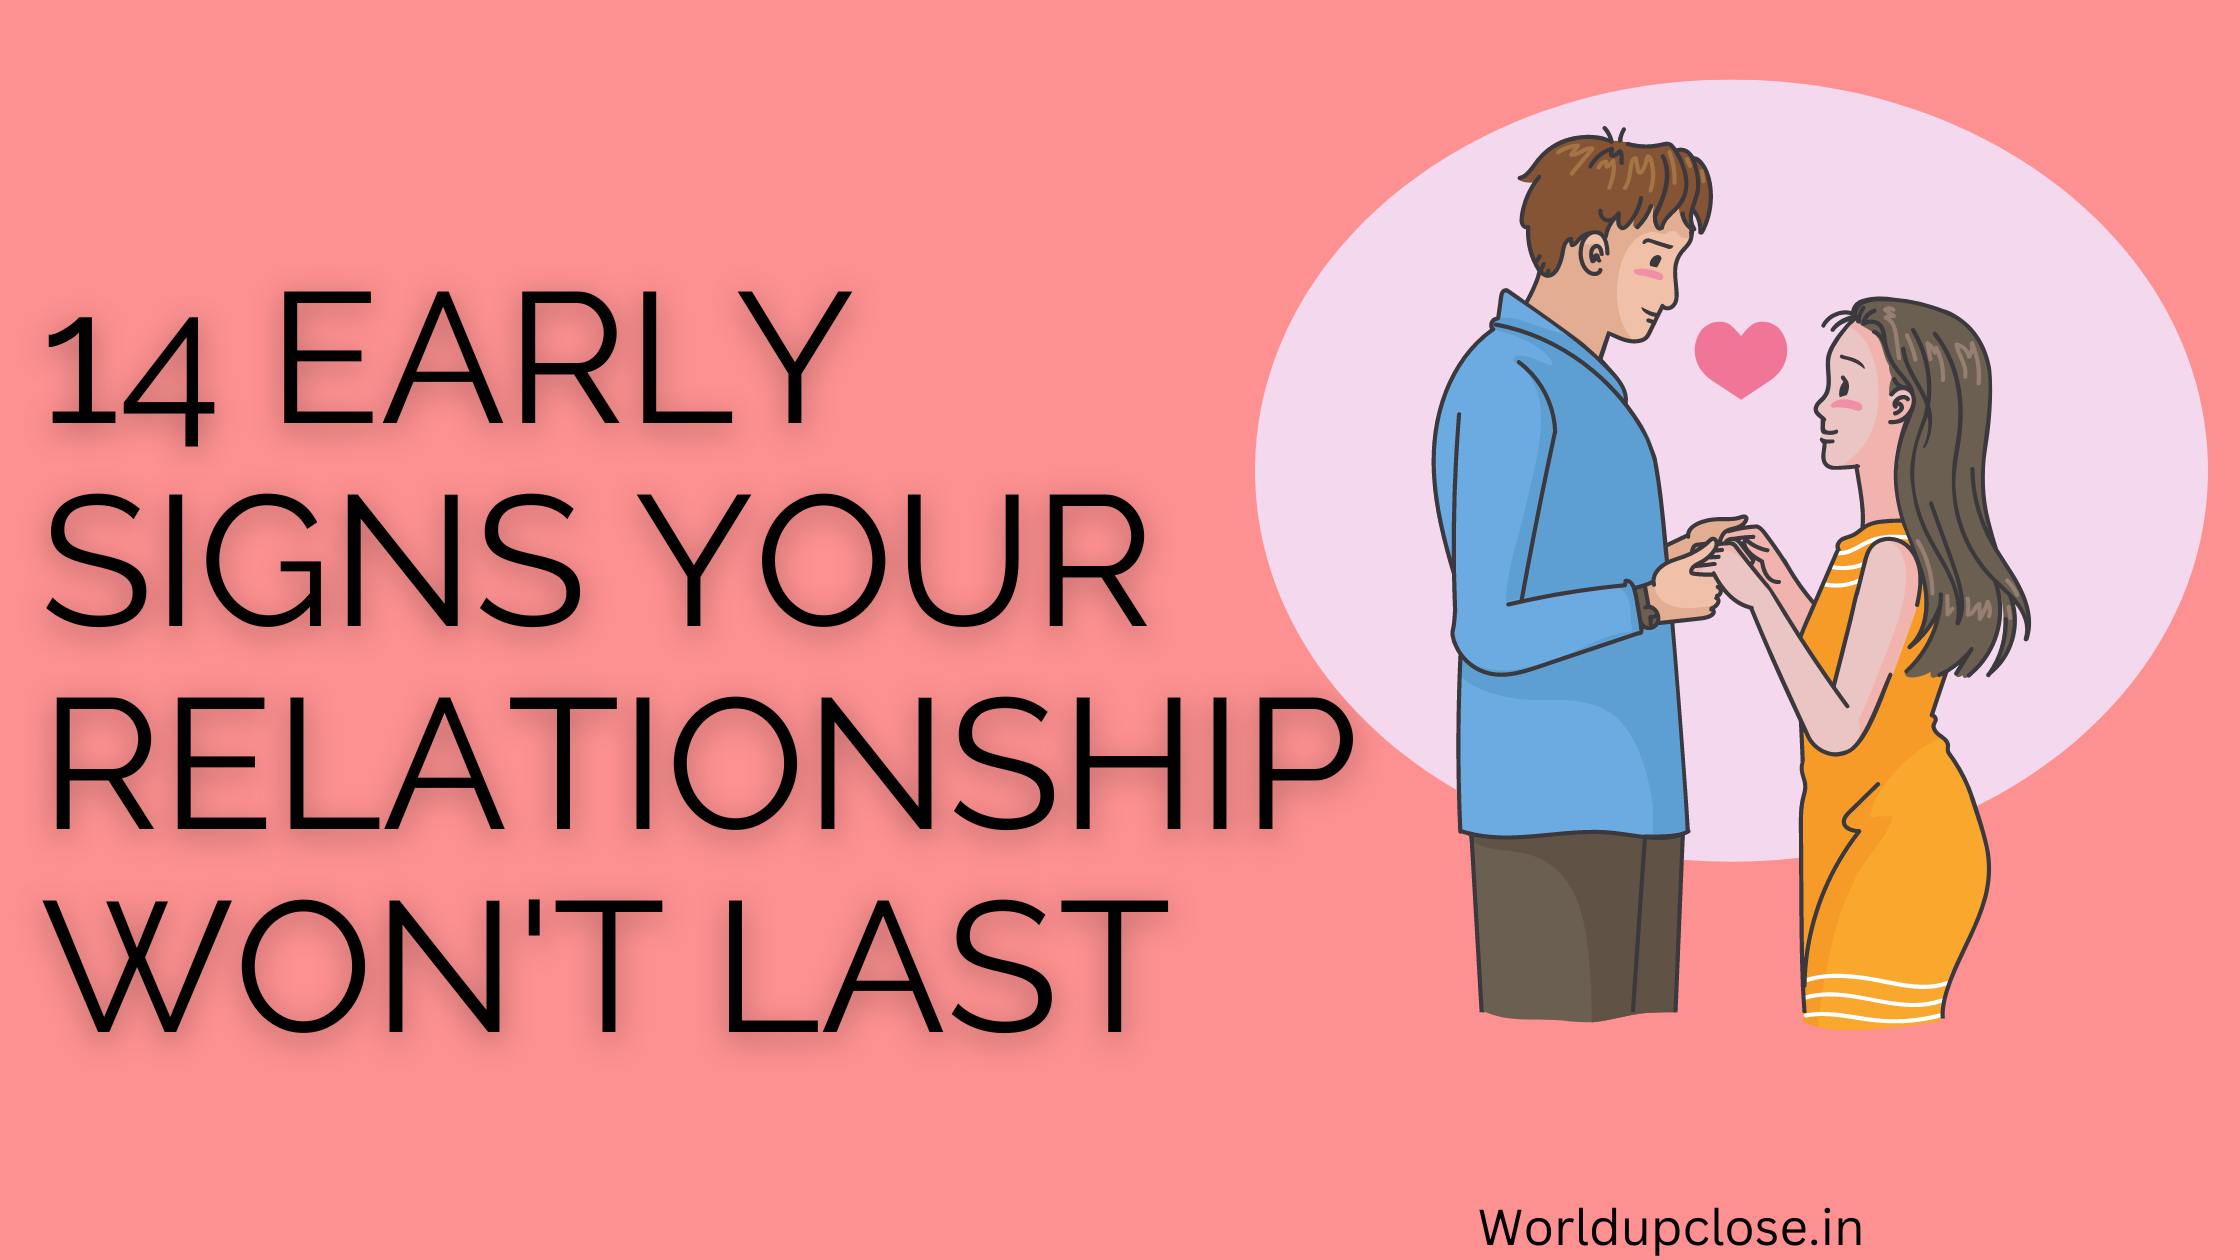 14 Early Signs Your Relationship Won't Last 54